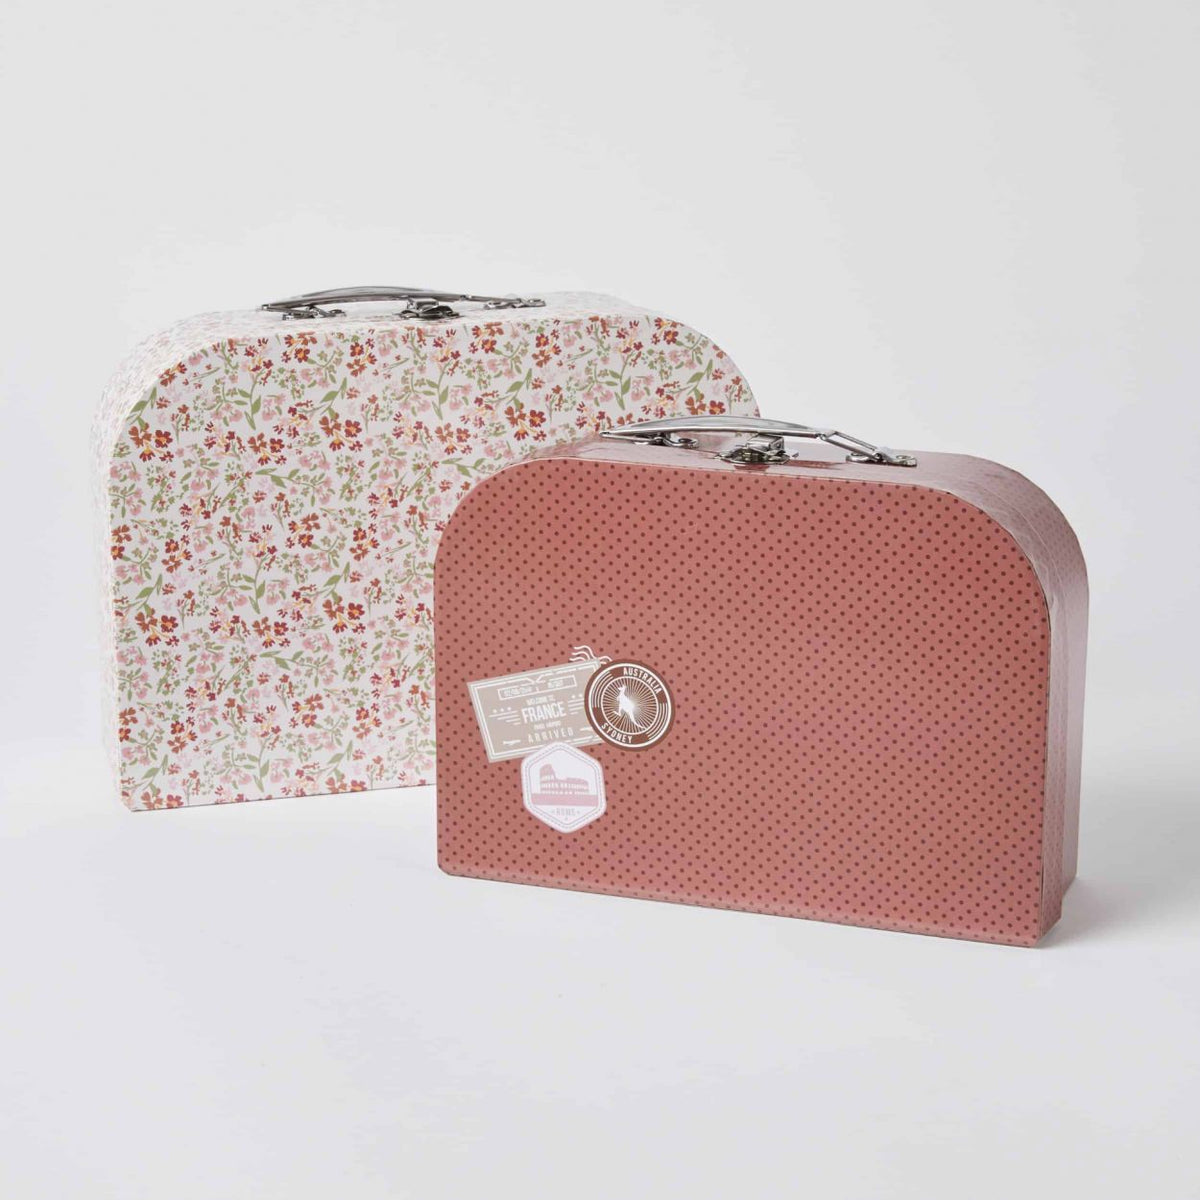 Notting Hill Bear Suitcase Small - Oxford Garden Rose